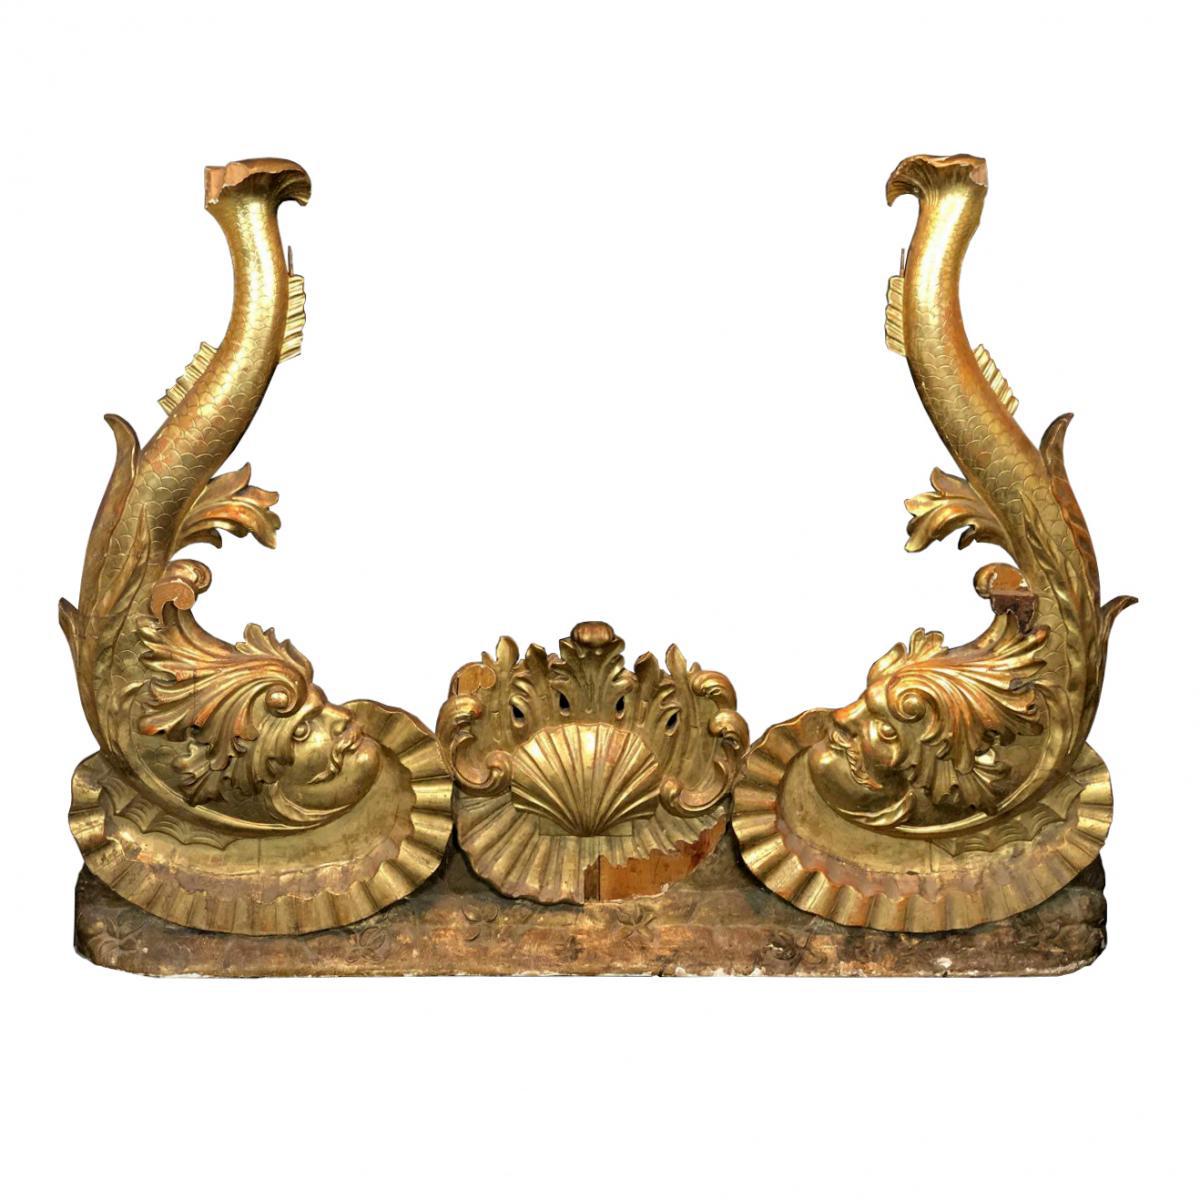 A decorative 19th giltwood frieze, Venice
A decorative antique Italian frieze in gilt-wood.
Period: 19th century. Provenance: Italy, Venice a “Certificate of Authenticity” will be issued to you.